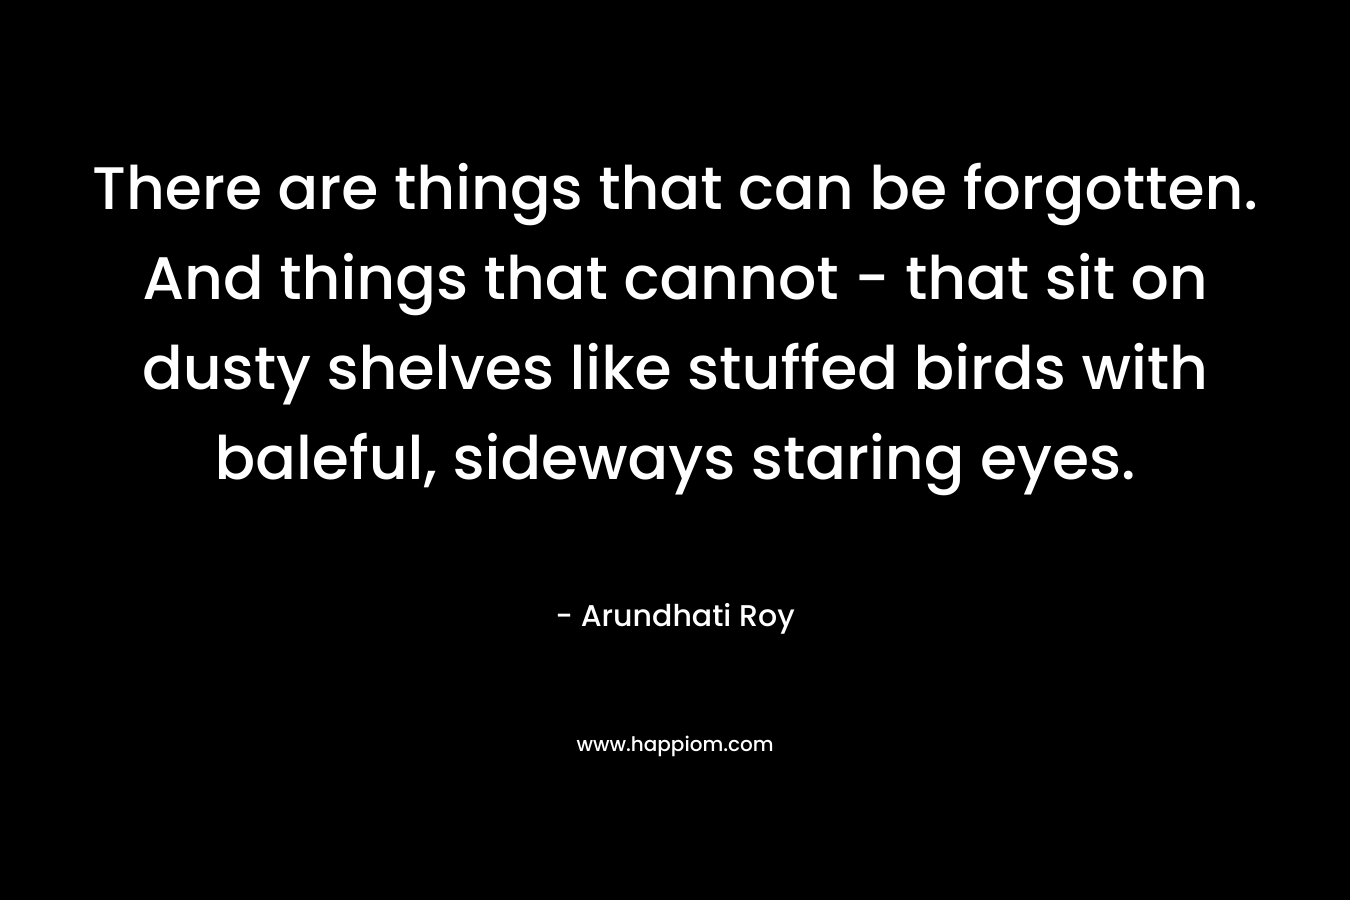 There are things that can be forgotten. And things that cannot – that sit on dusty shelves like stuffed birds with baleful, sideways staring eyes. – Arundhati Roy